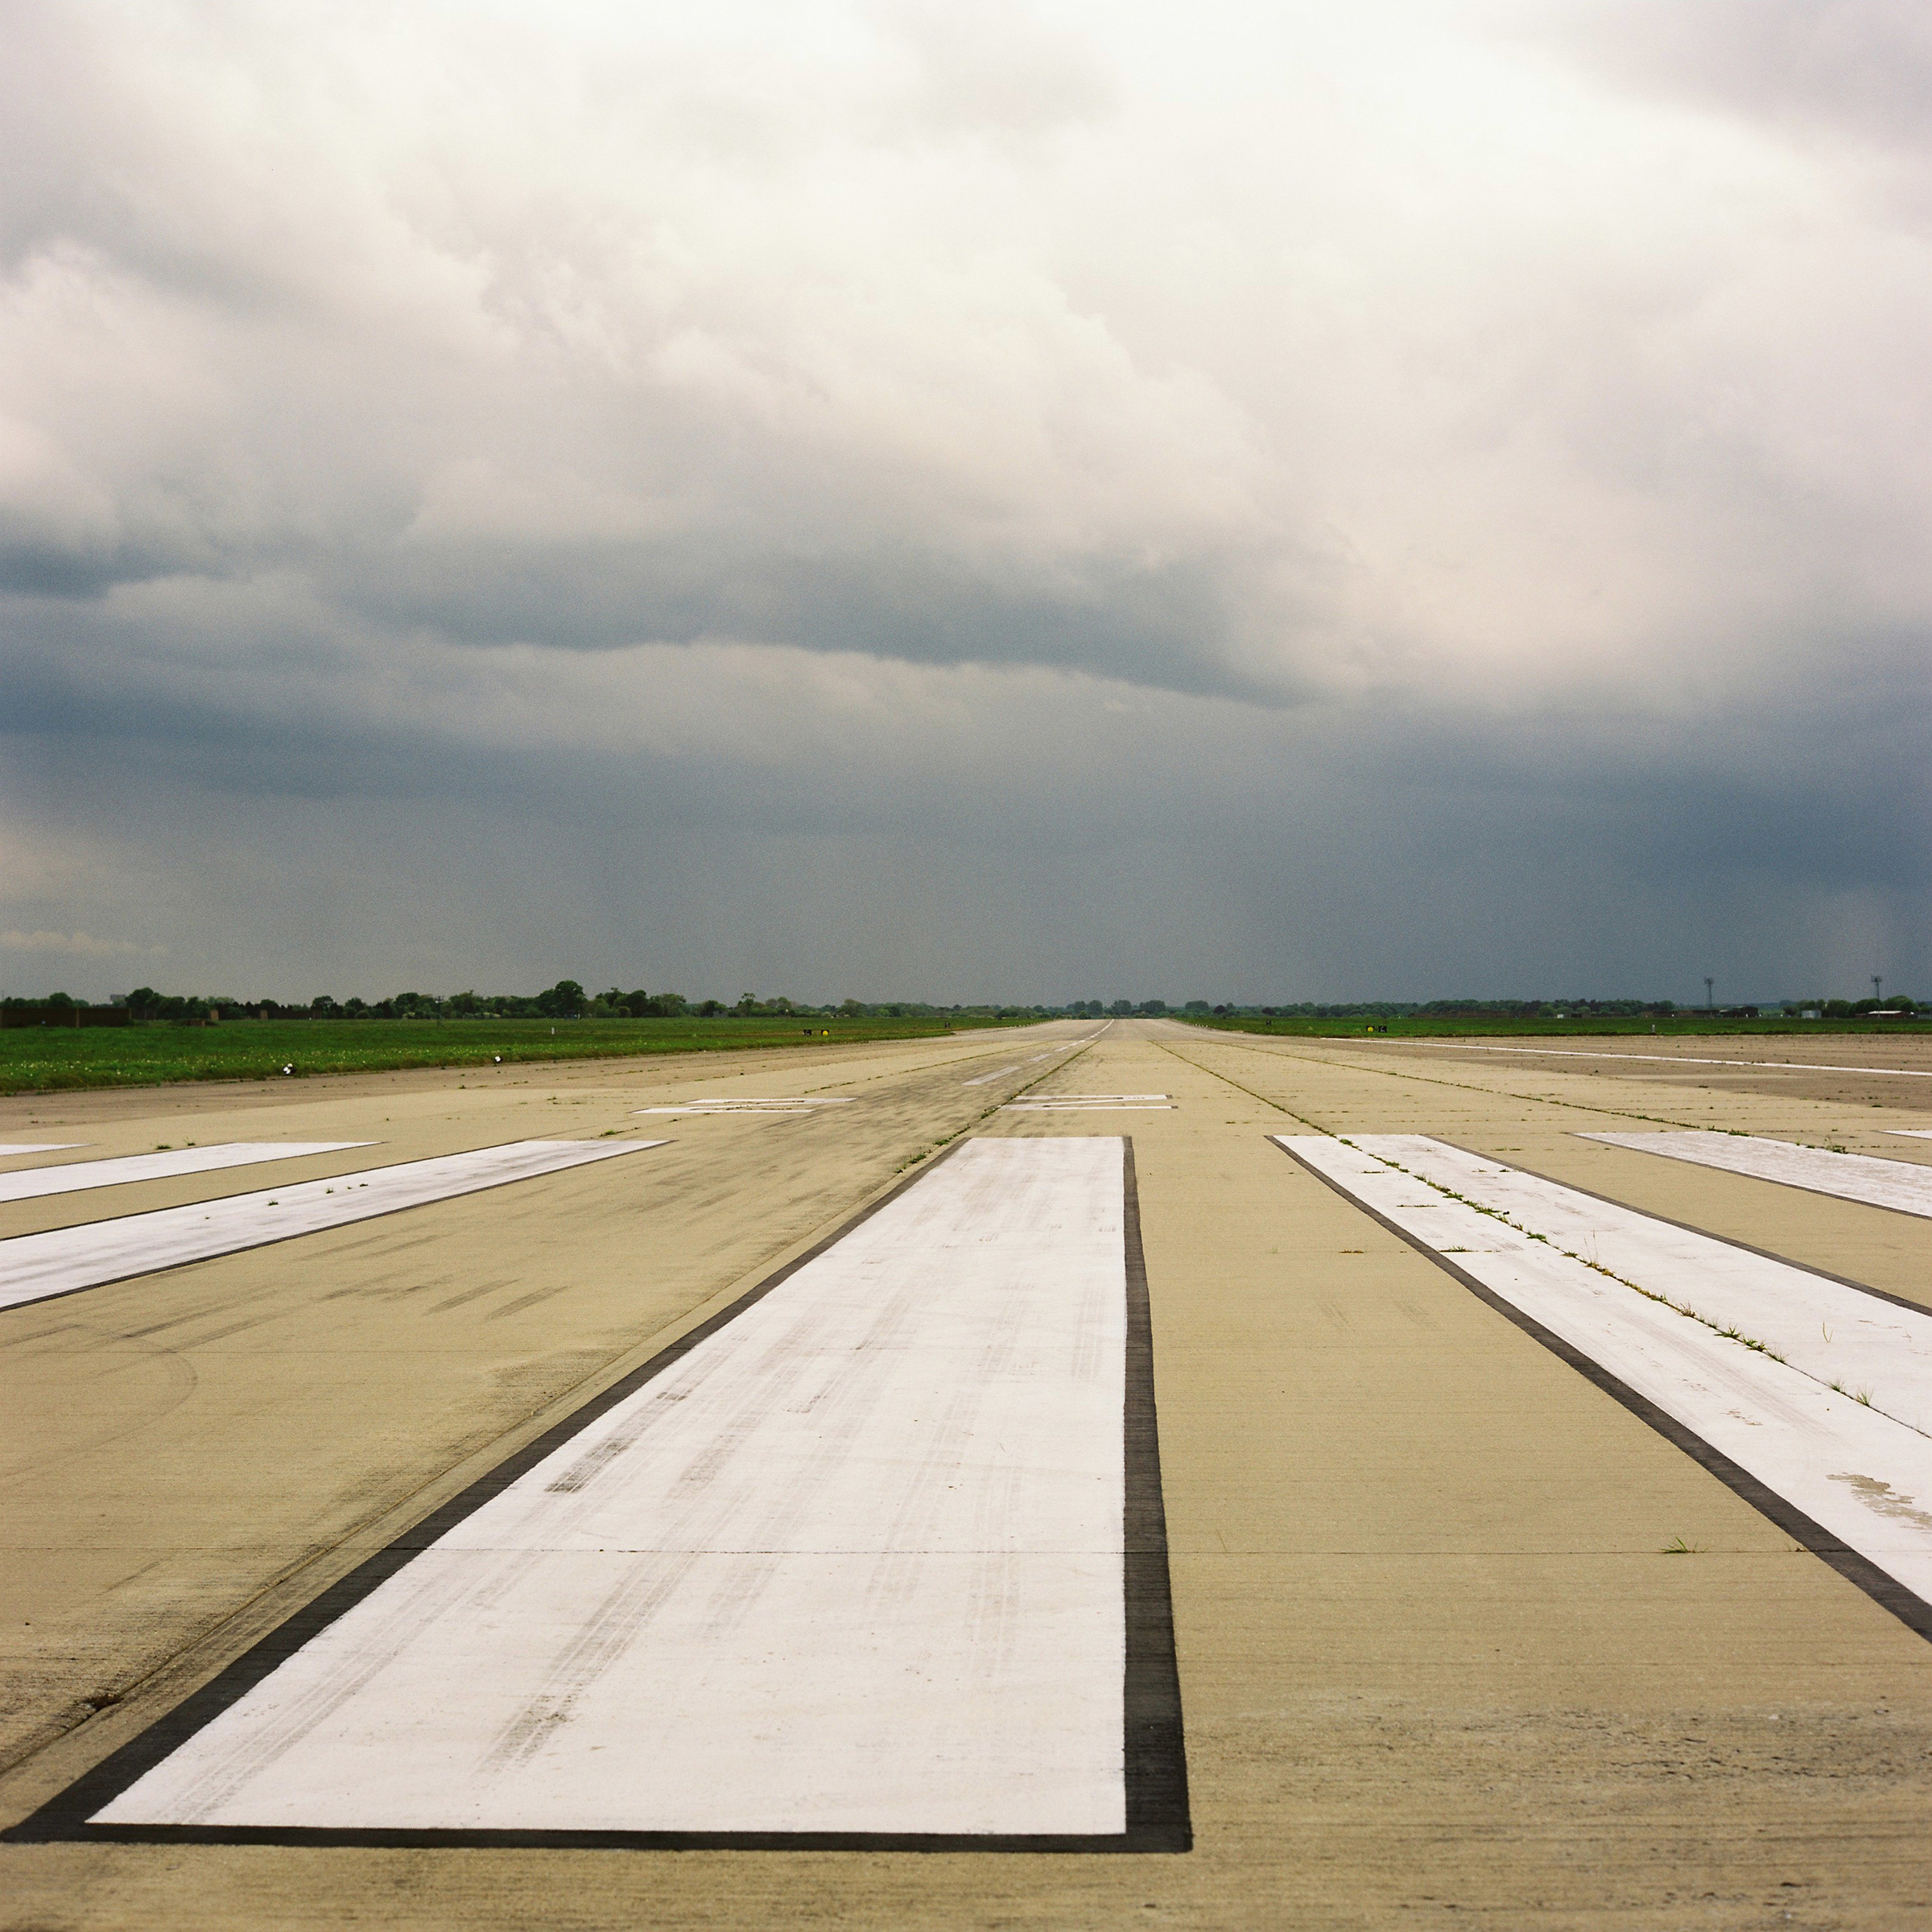 Concrete runway with large white markings fades into vanishing point under a grey cloudy sky